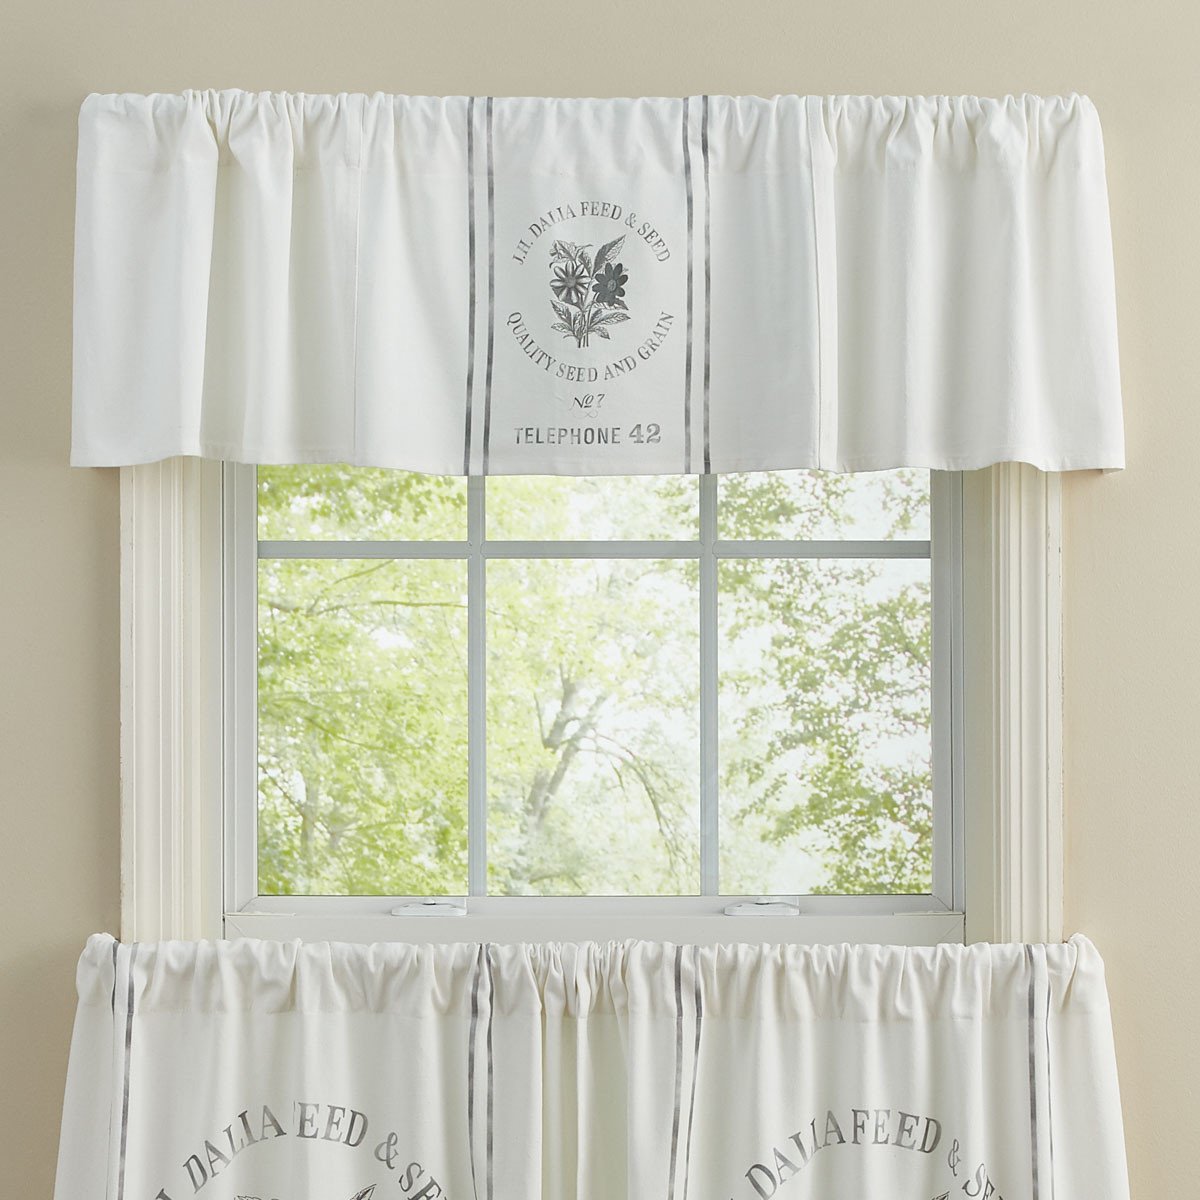 Park Design Seed Sack Unlined Window Valance  60 x 14 Inches - Olde Church Emporium